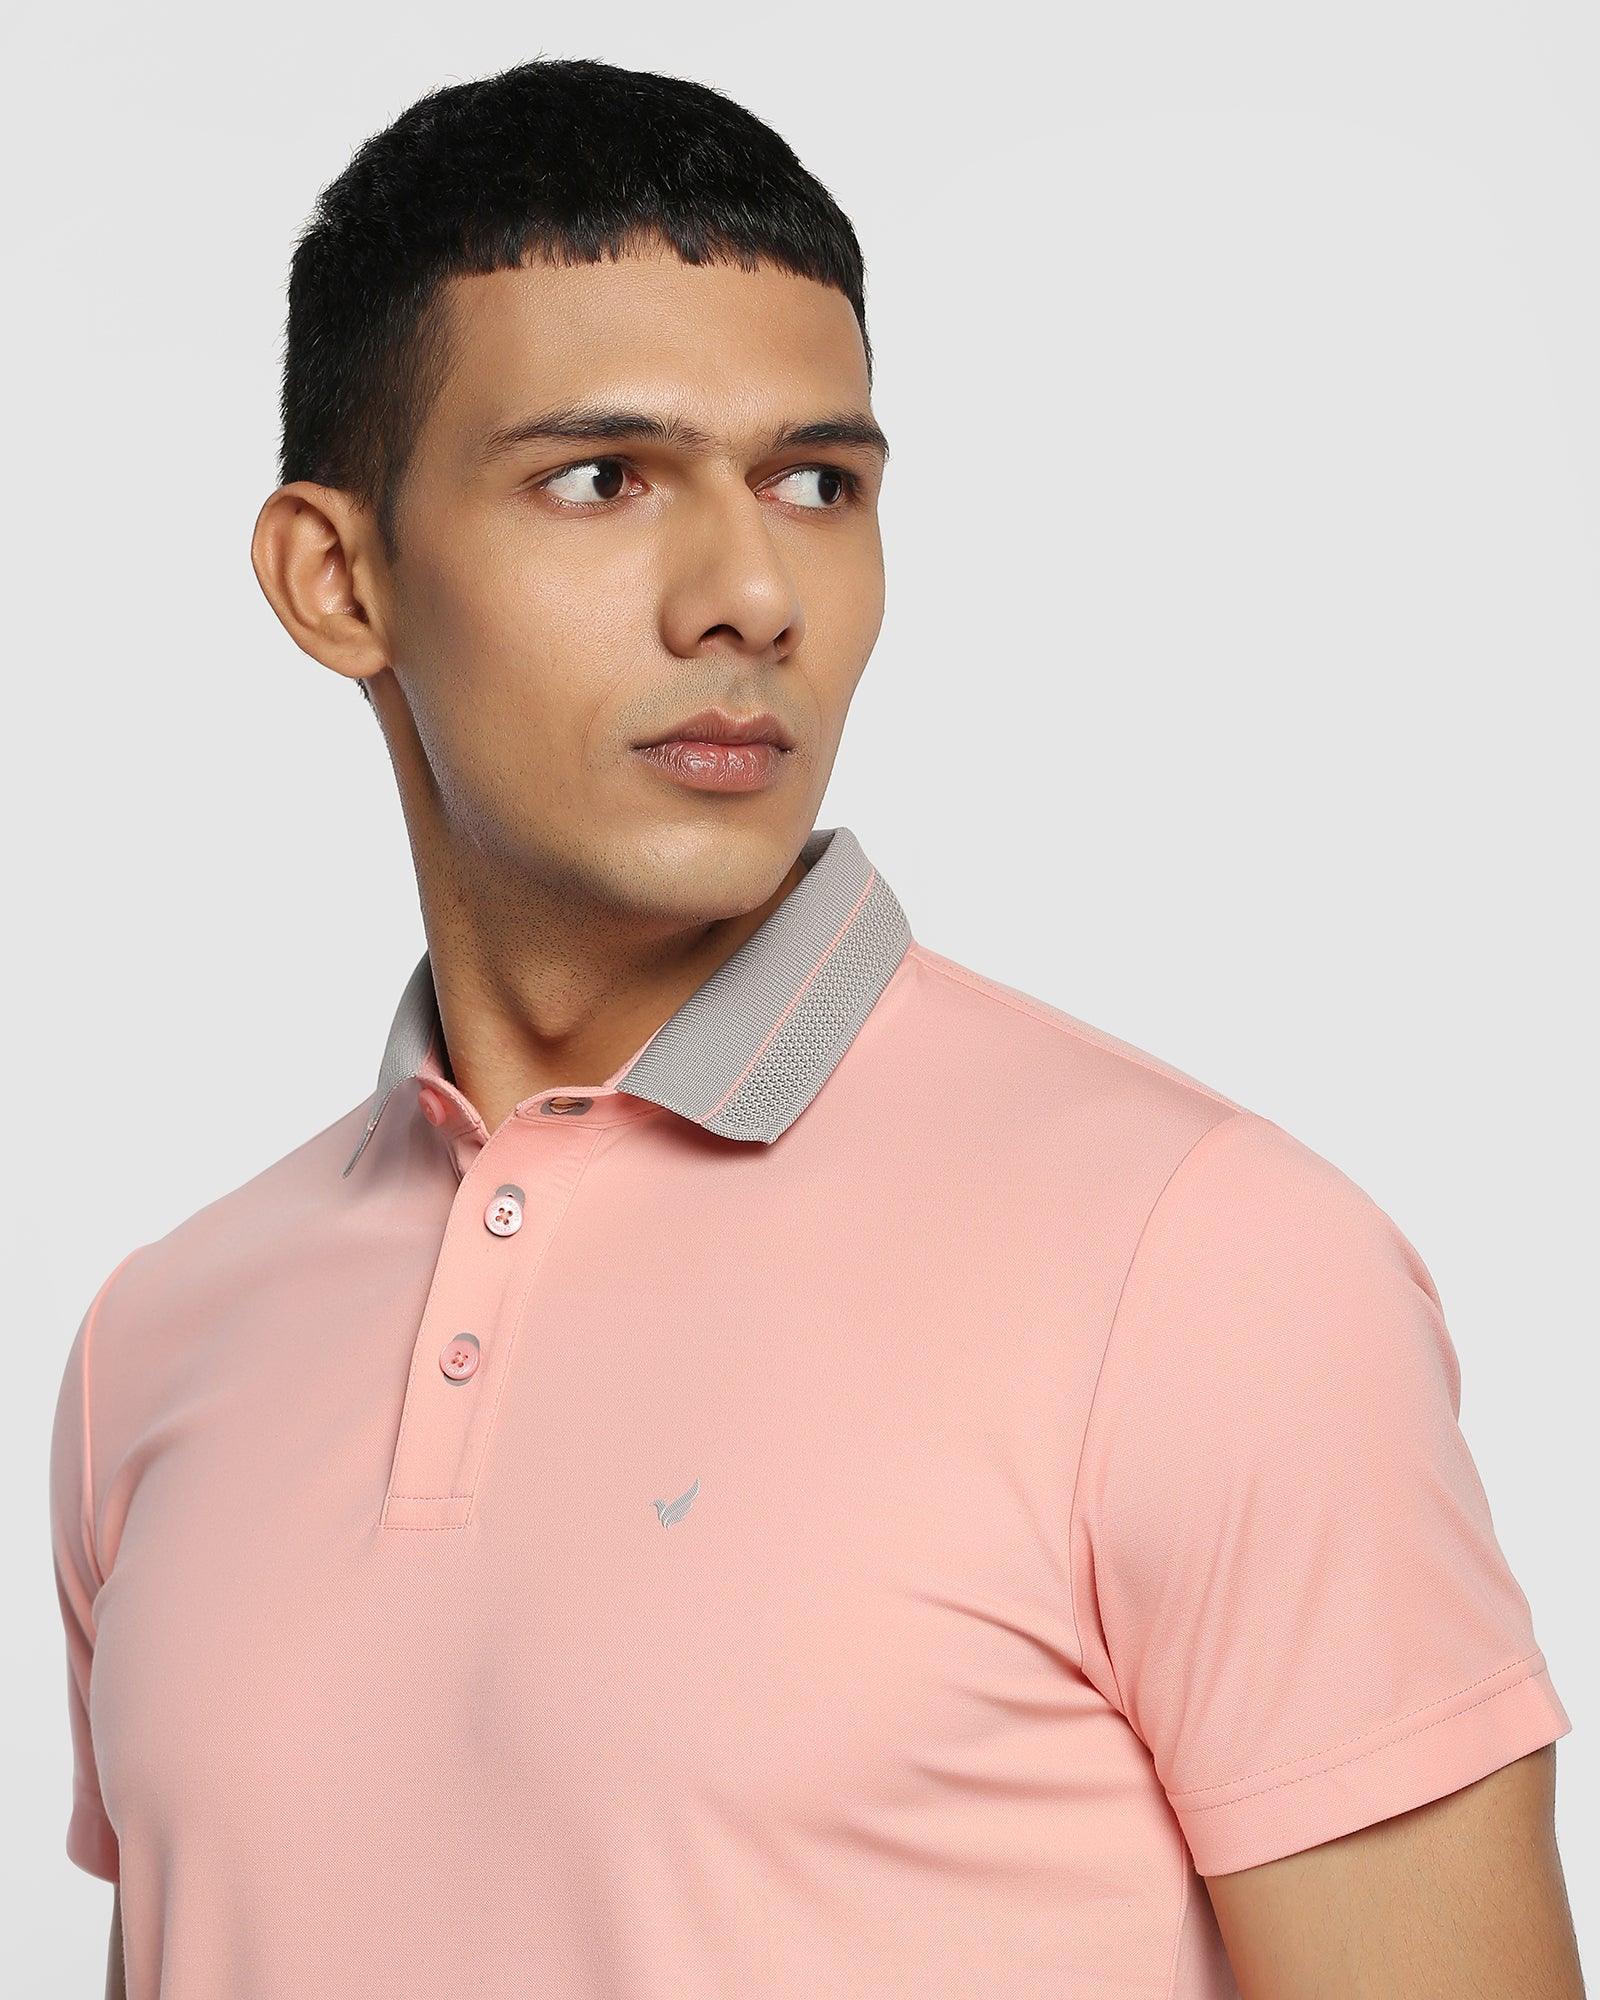 TechPro Polo Pink Solid T Shirt - Susan